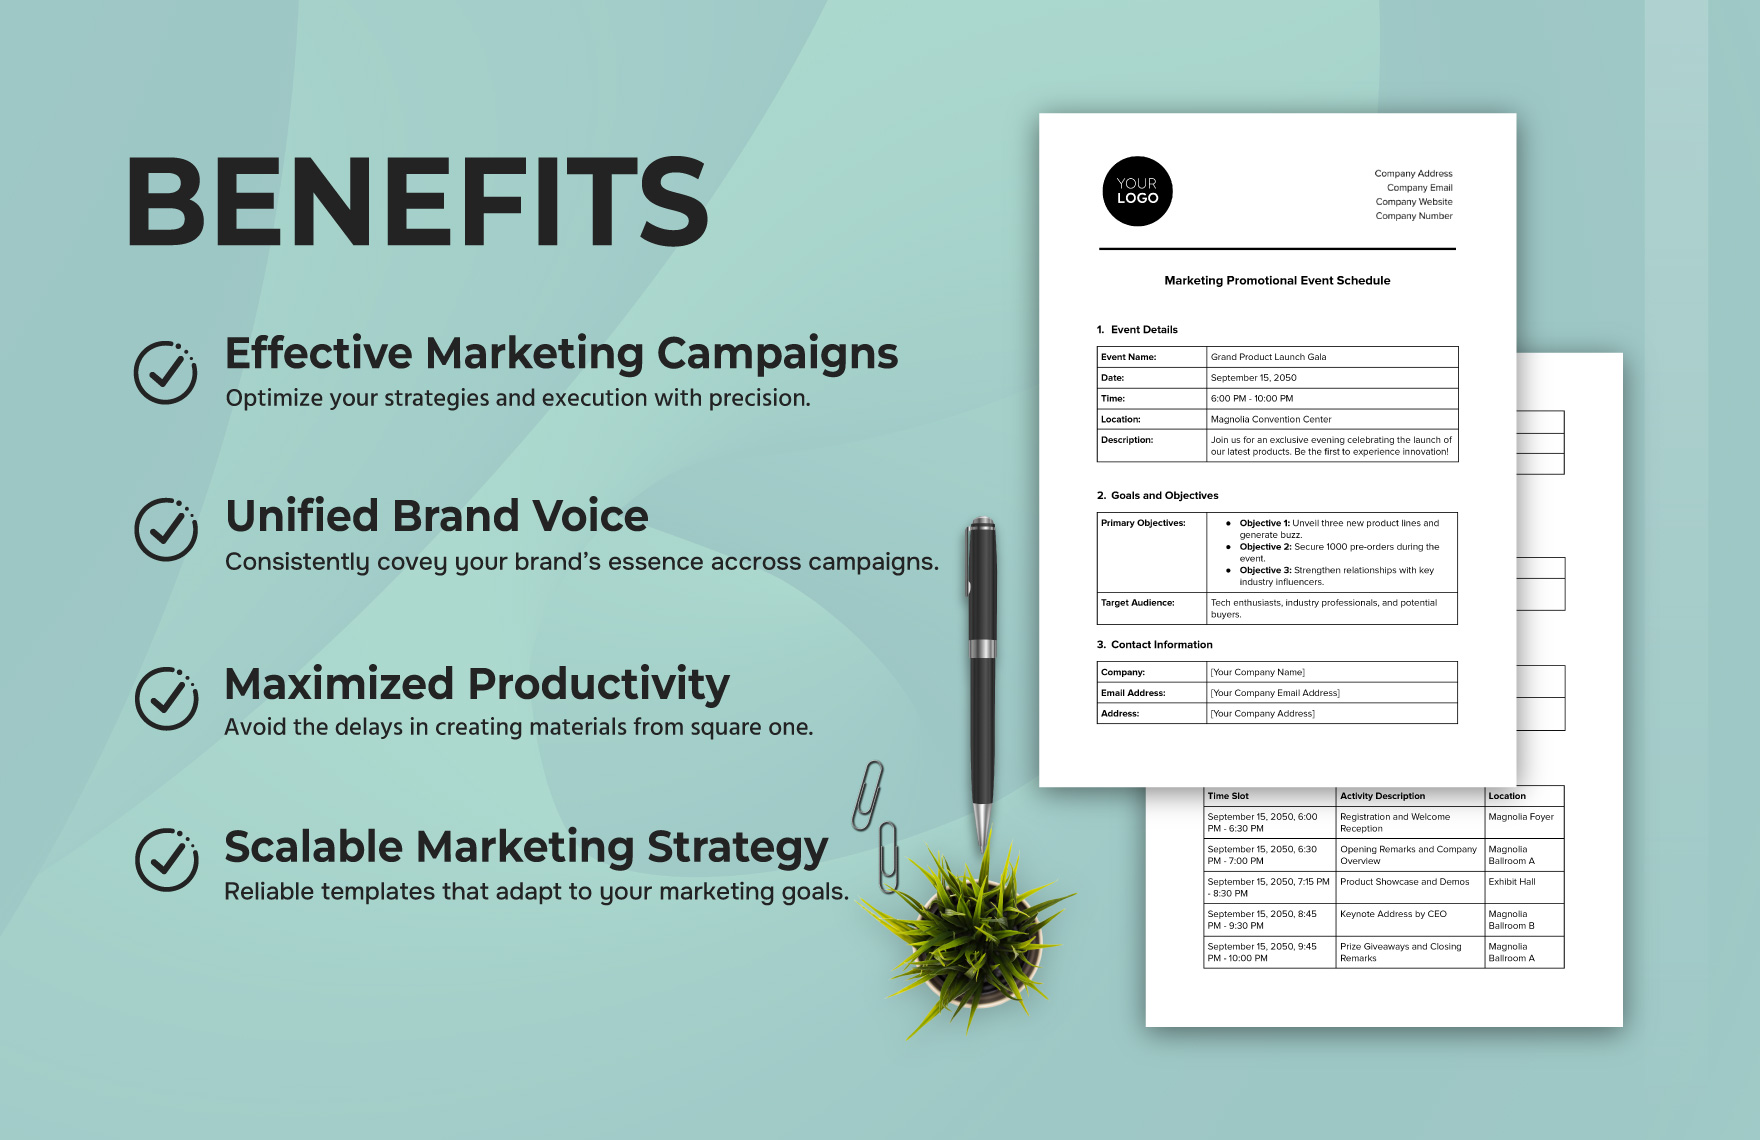 Marketing Promotional Event Schedule Template